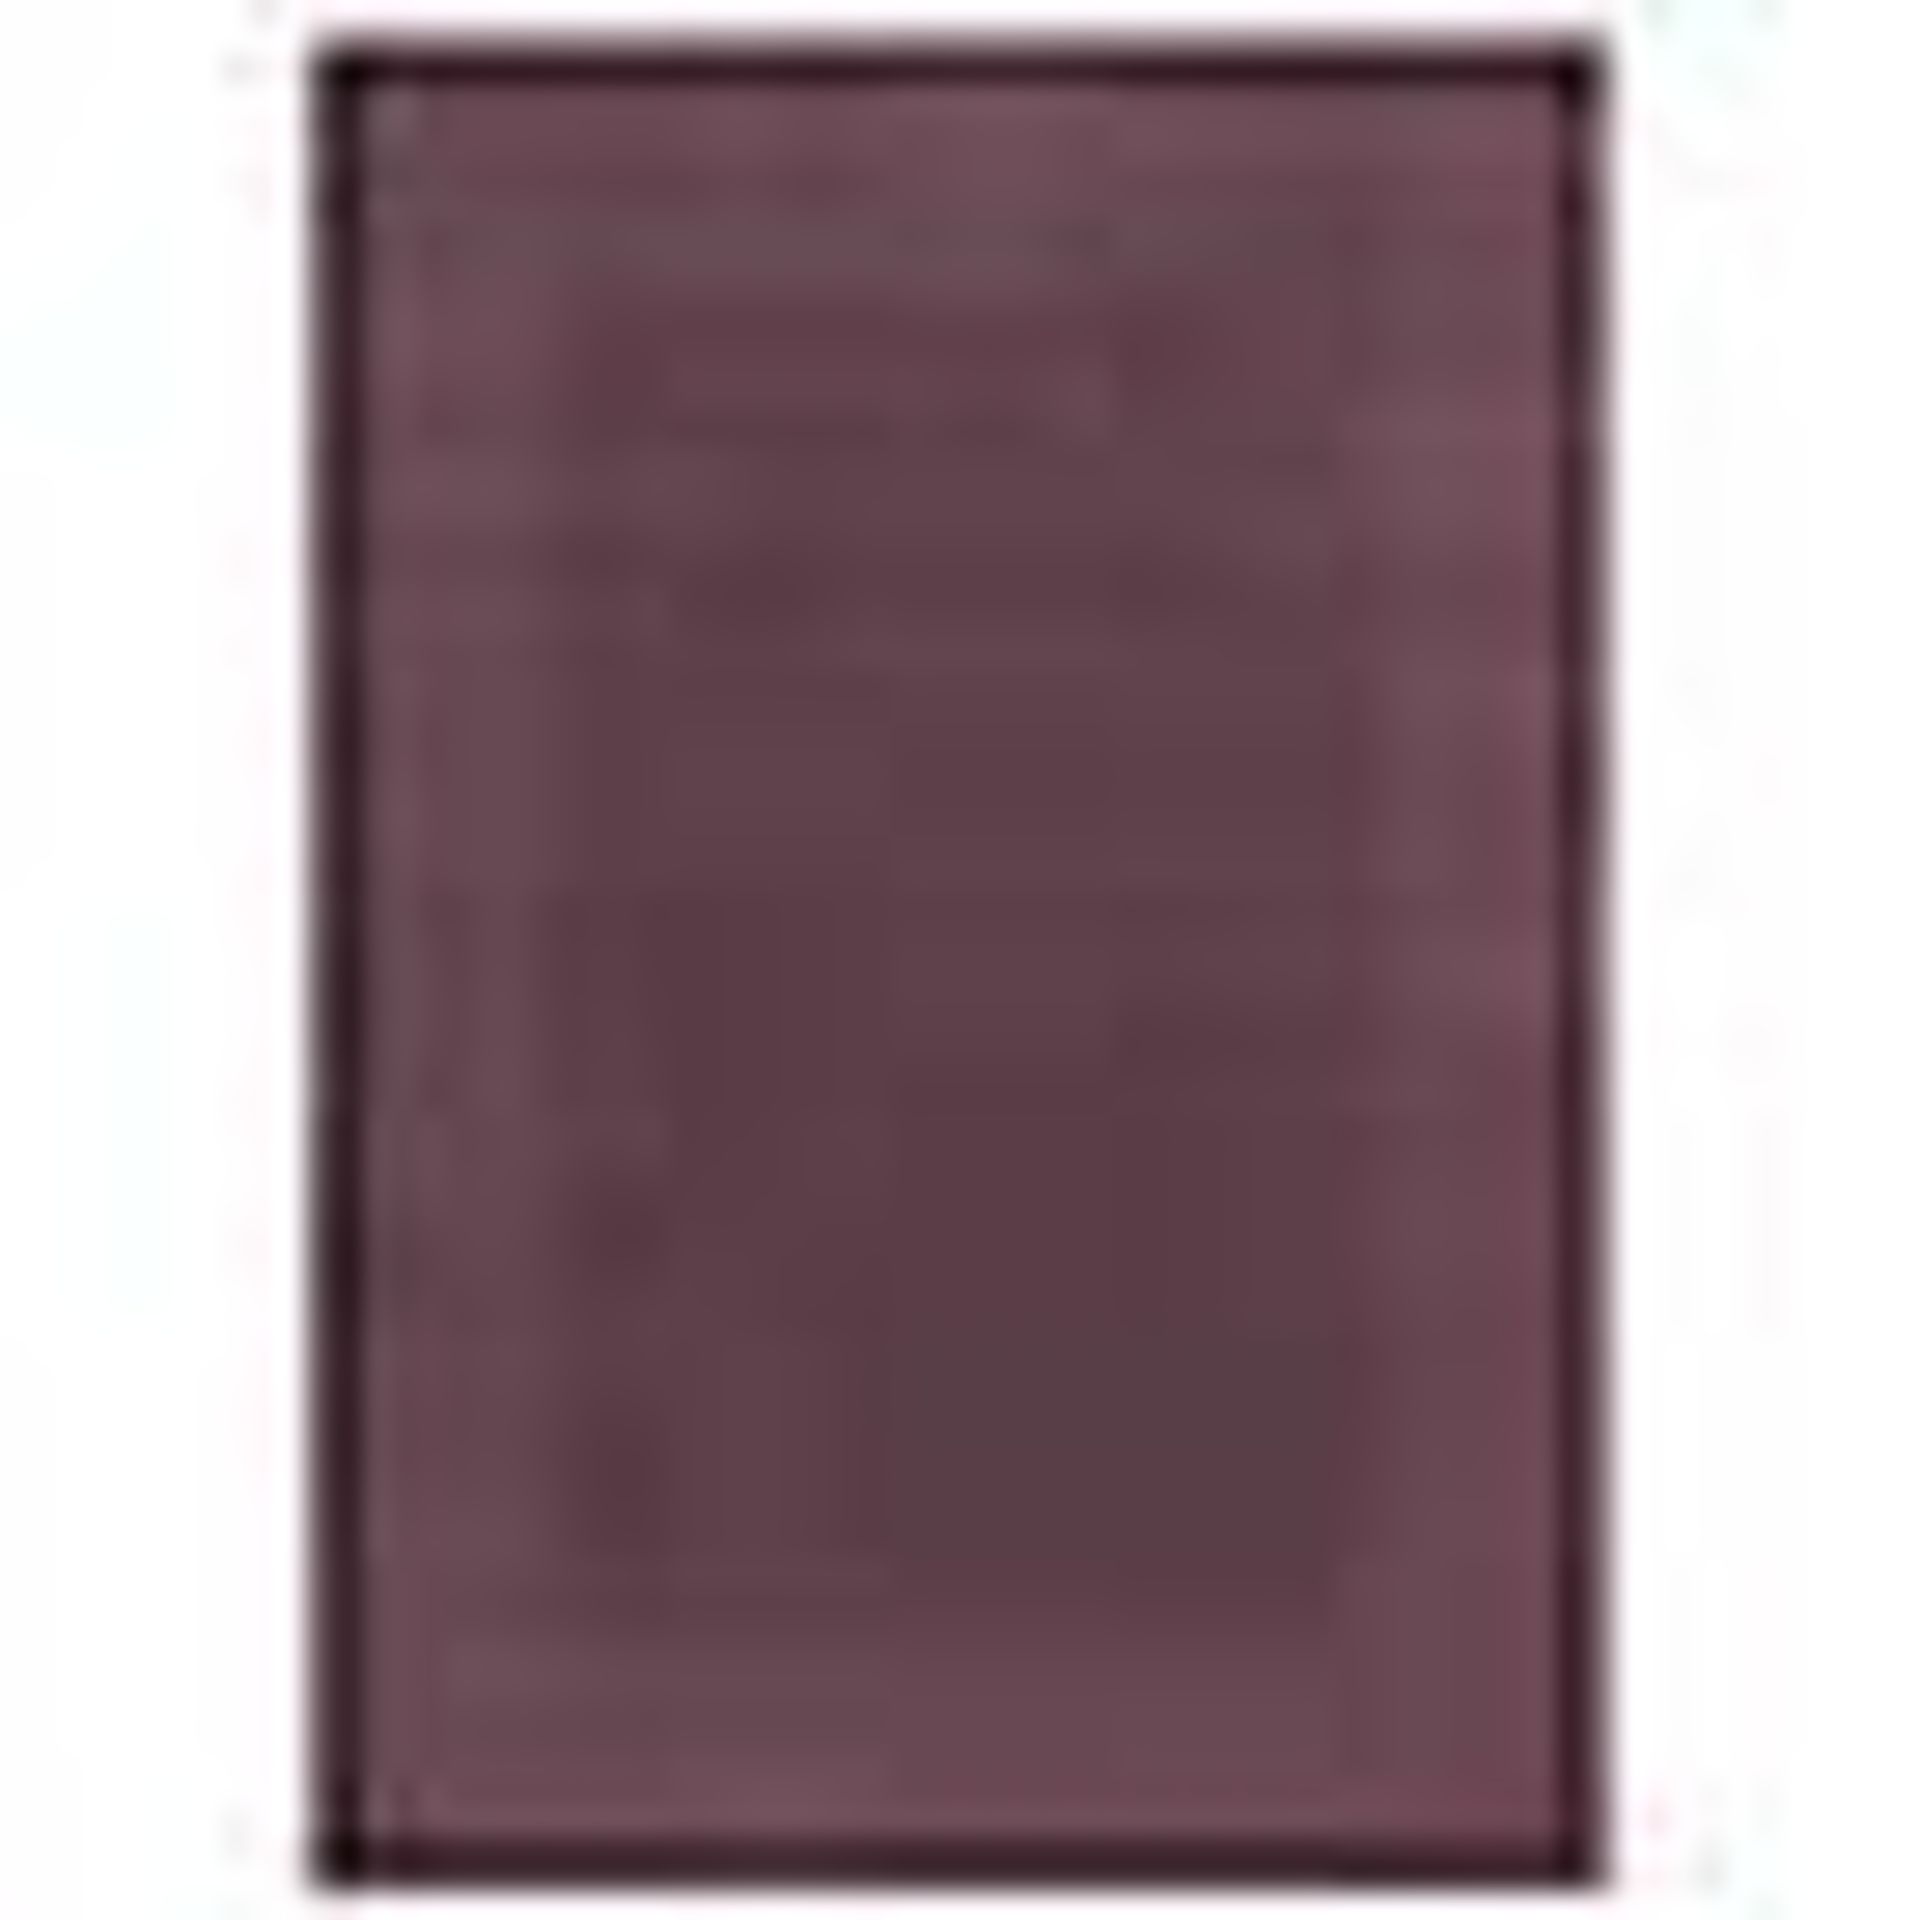 Tuscany D040 Rug Boston Wool Border Plum Rectangle 160X230cm RRP 129 About the Product(s) Tuscany - Image 2 of 3